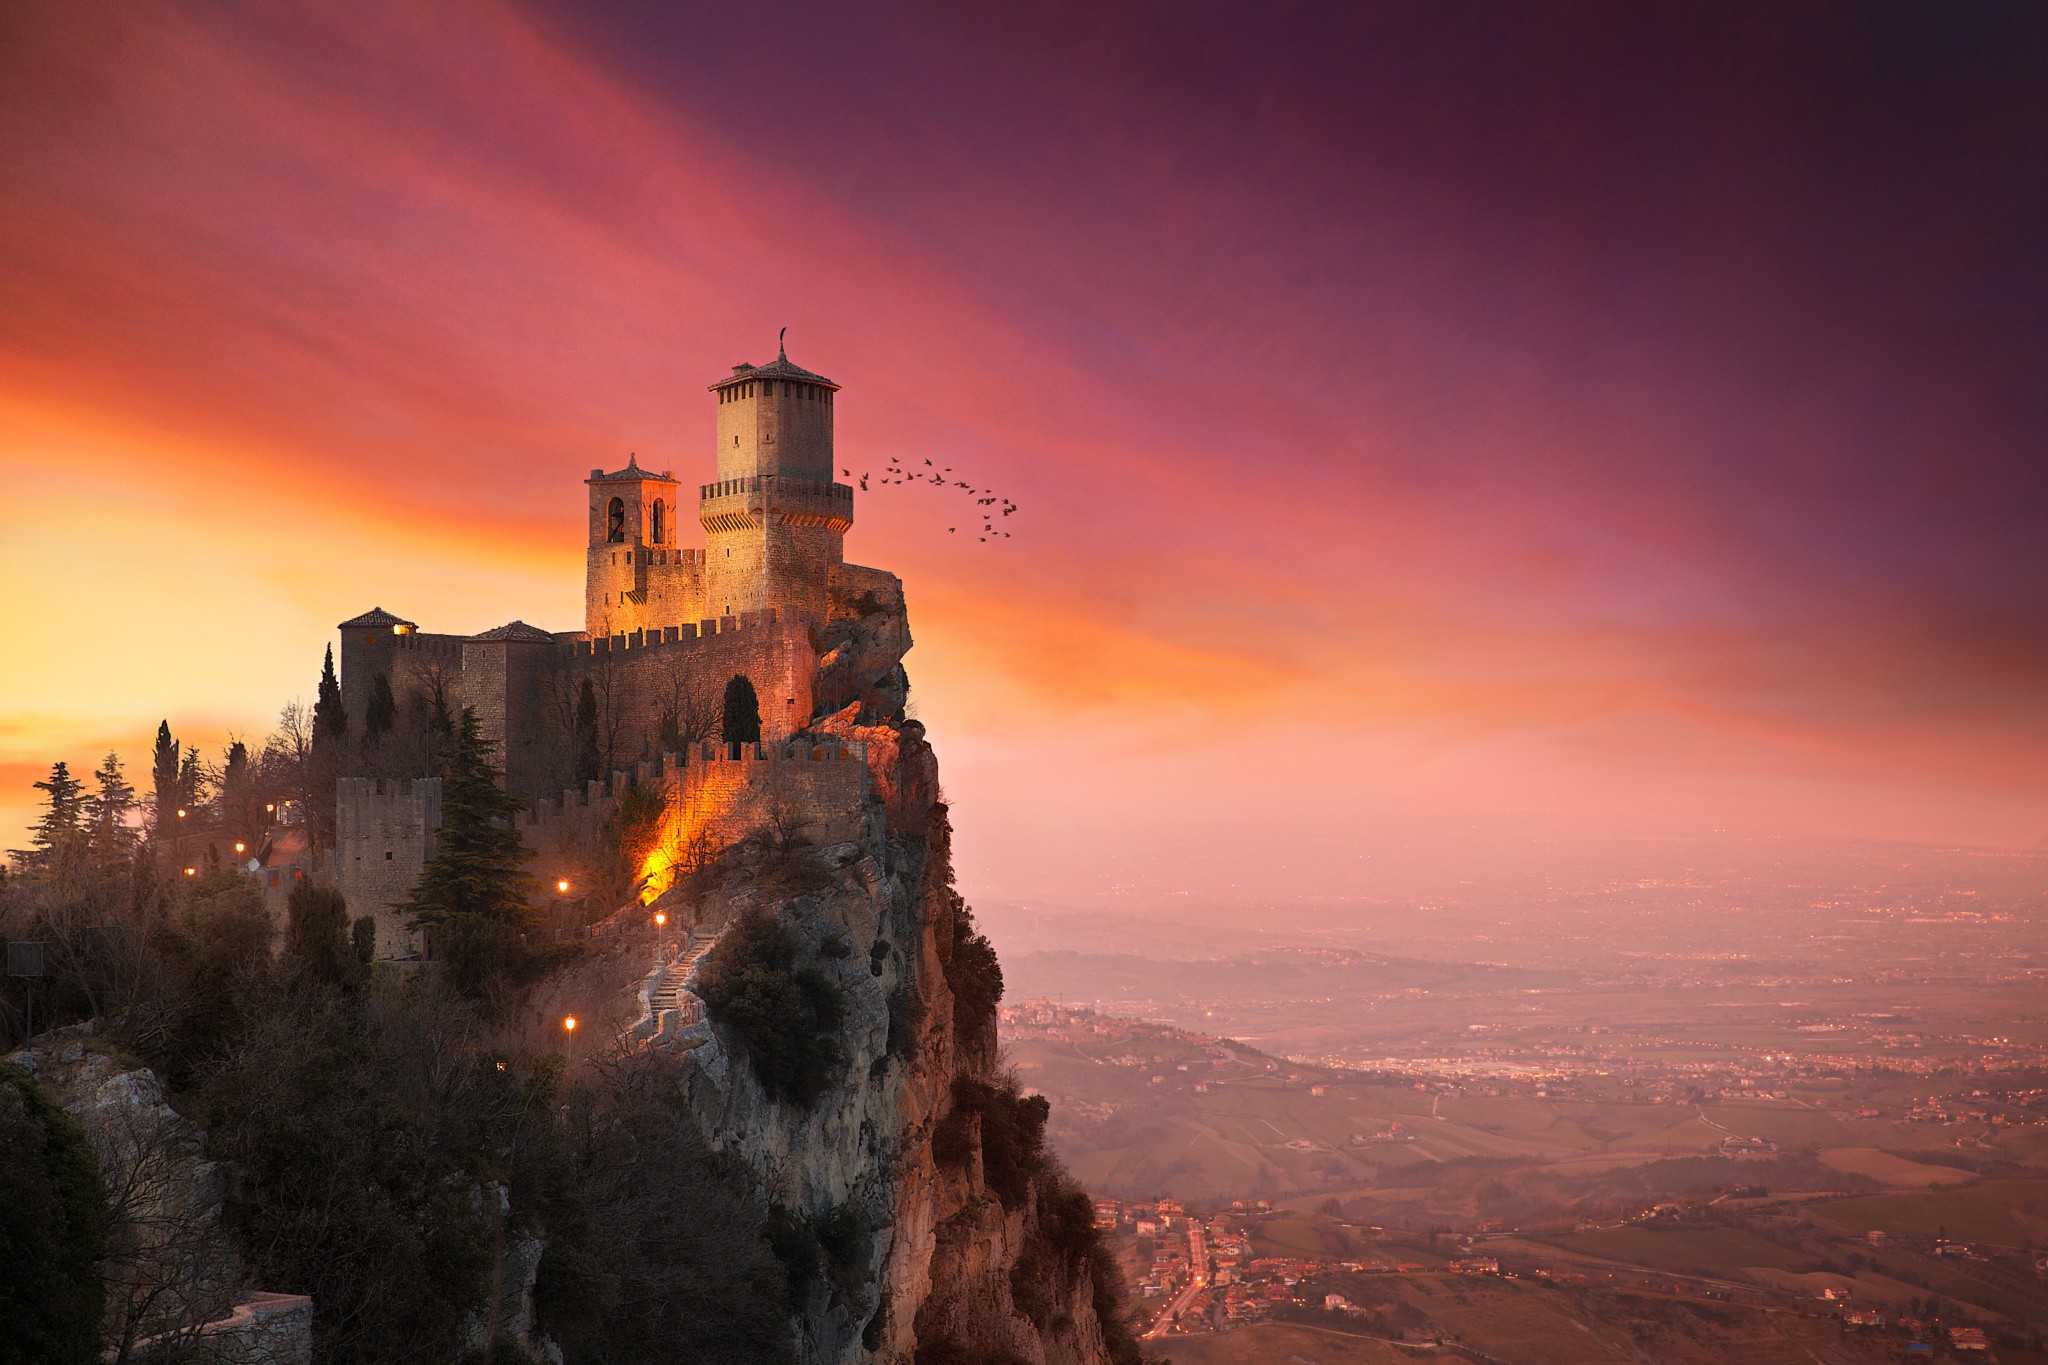 Architecture Castle Nature Landscape Trees San Marino Rock Hills Town Tower Sunset Clouds House Bird 2048x1365